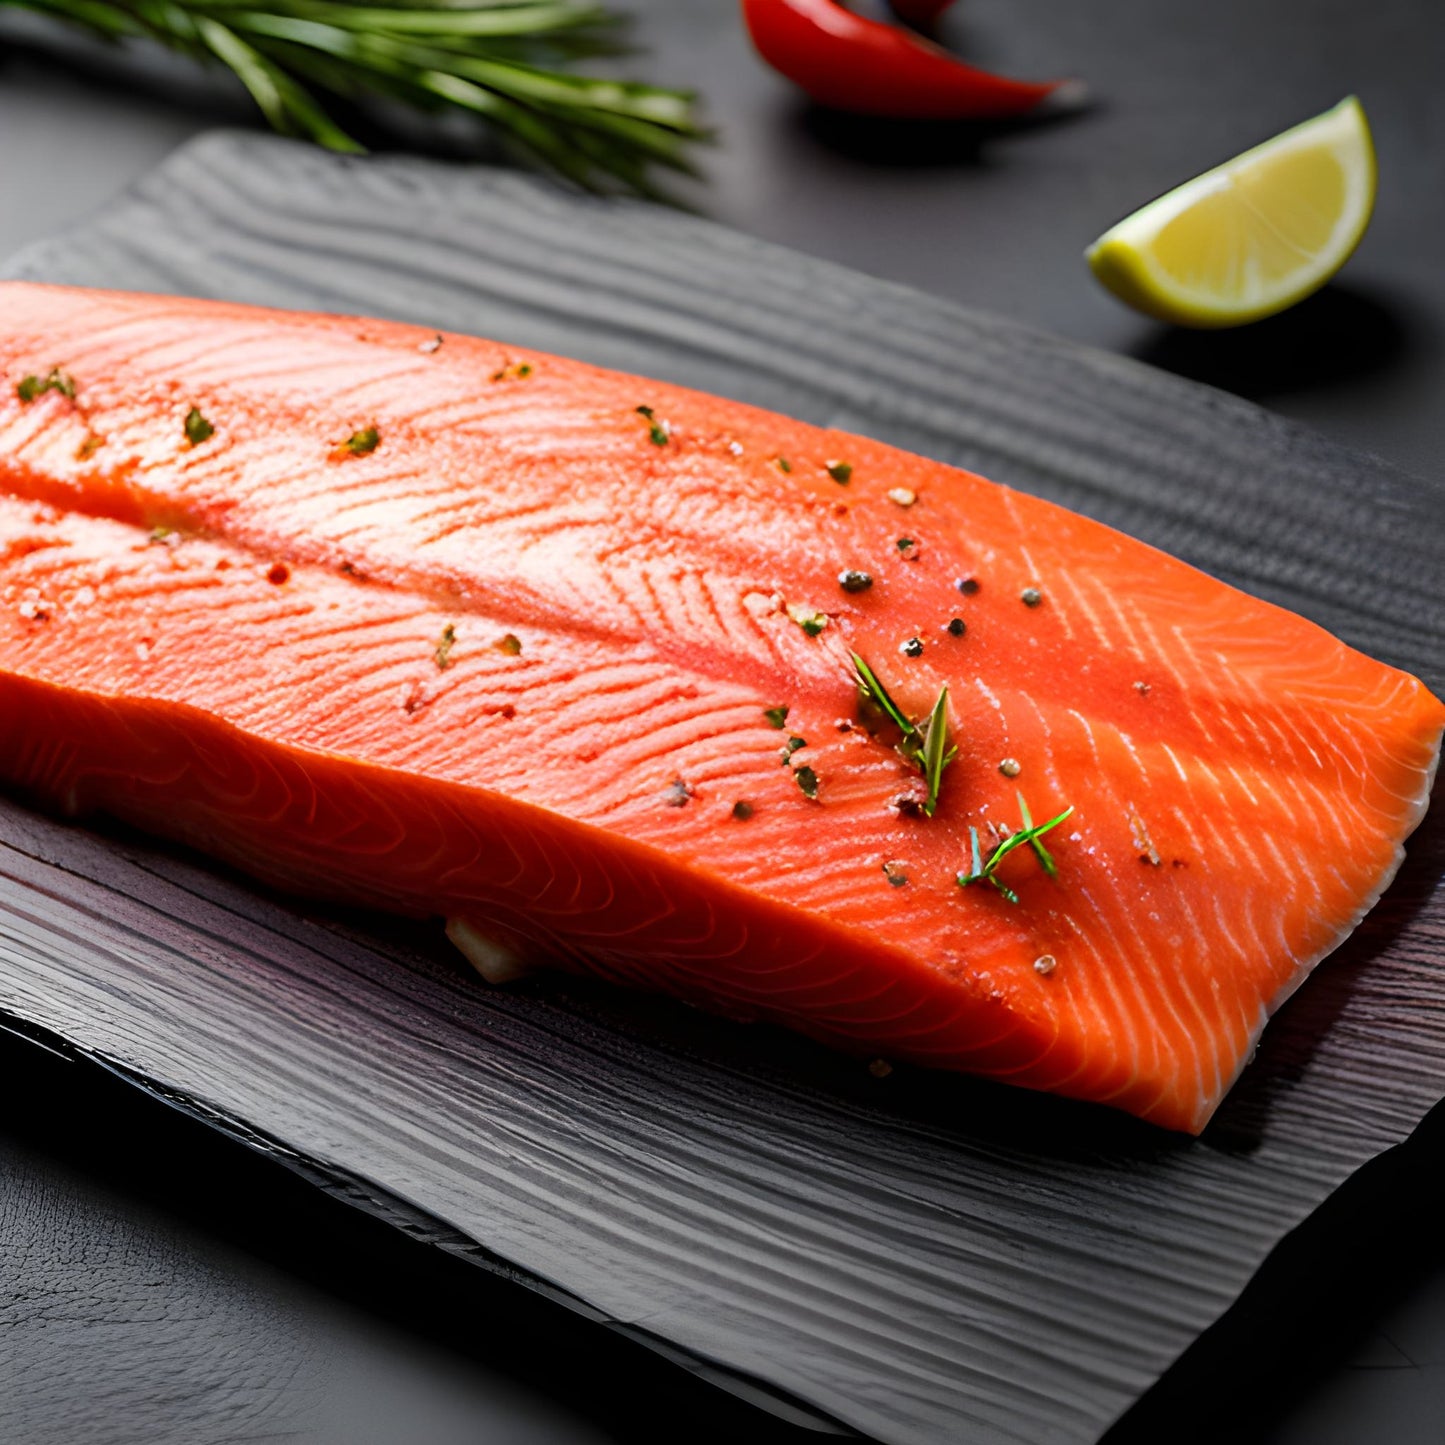 Wild Caught Sockeye Salmon Fillets *Save 1.00 Per Lb when you buy 5 Lb's or more*